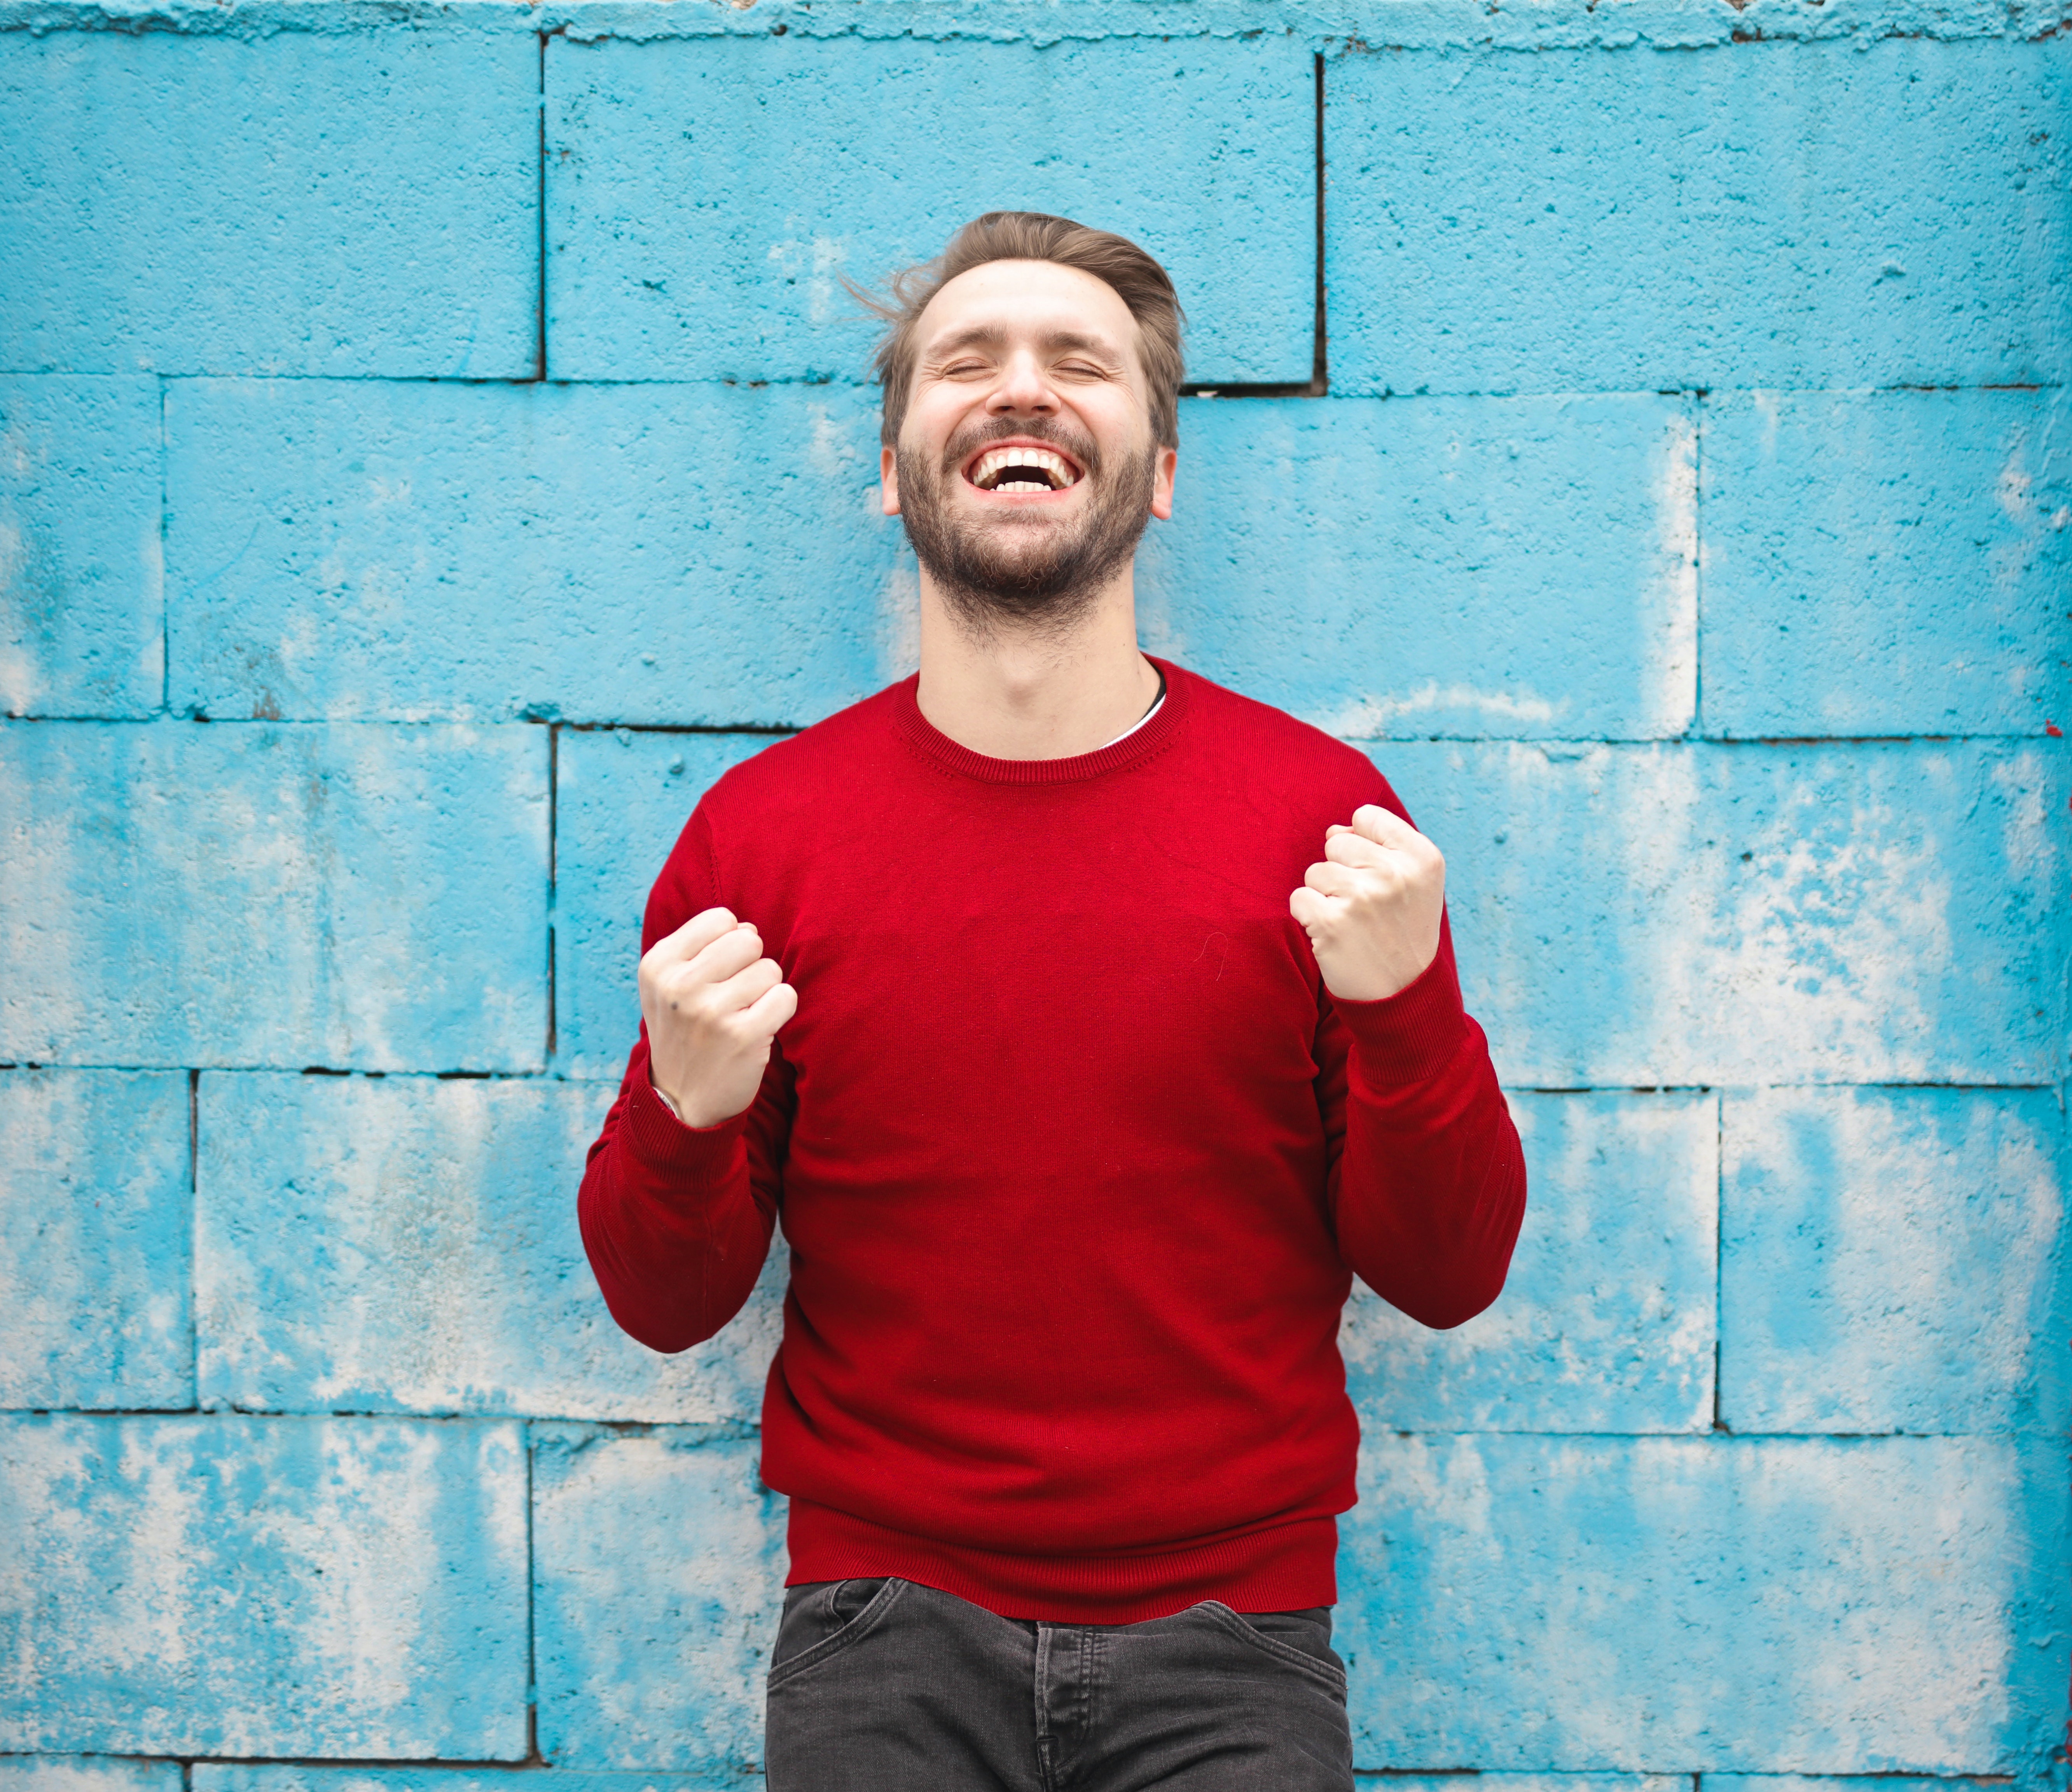 Image of a white man with a beard, wearing a bright red sweater on a light blue brick background, smiling with his eyes closed and his hands clenched near his chest.